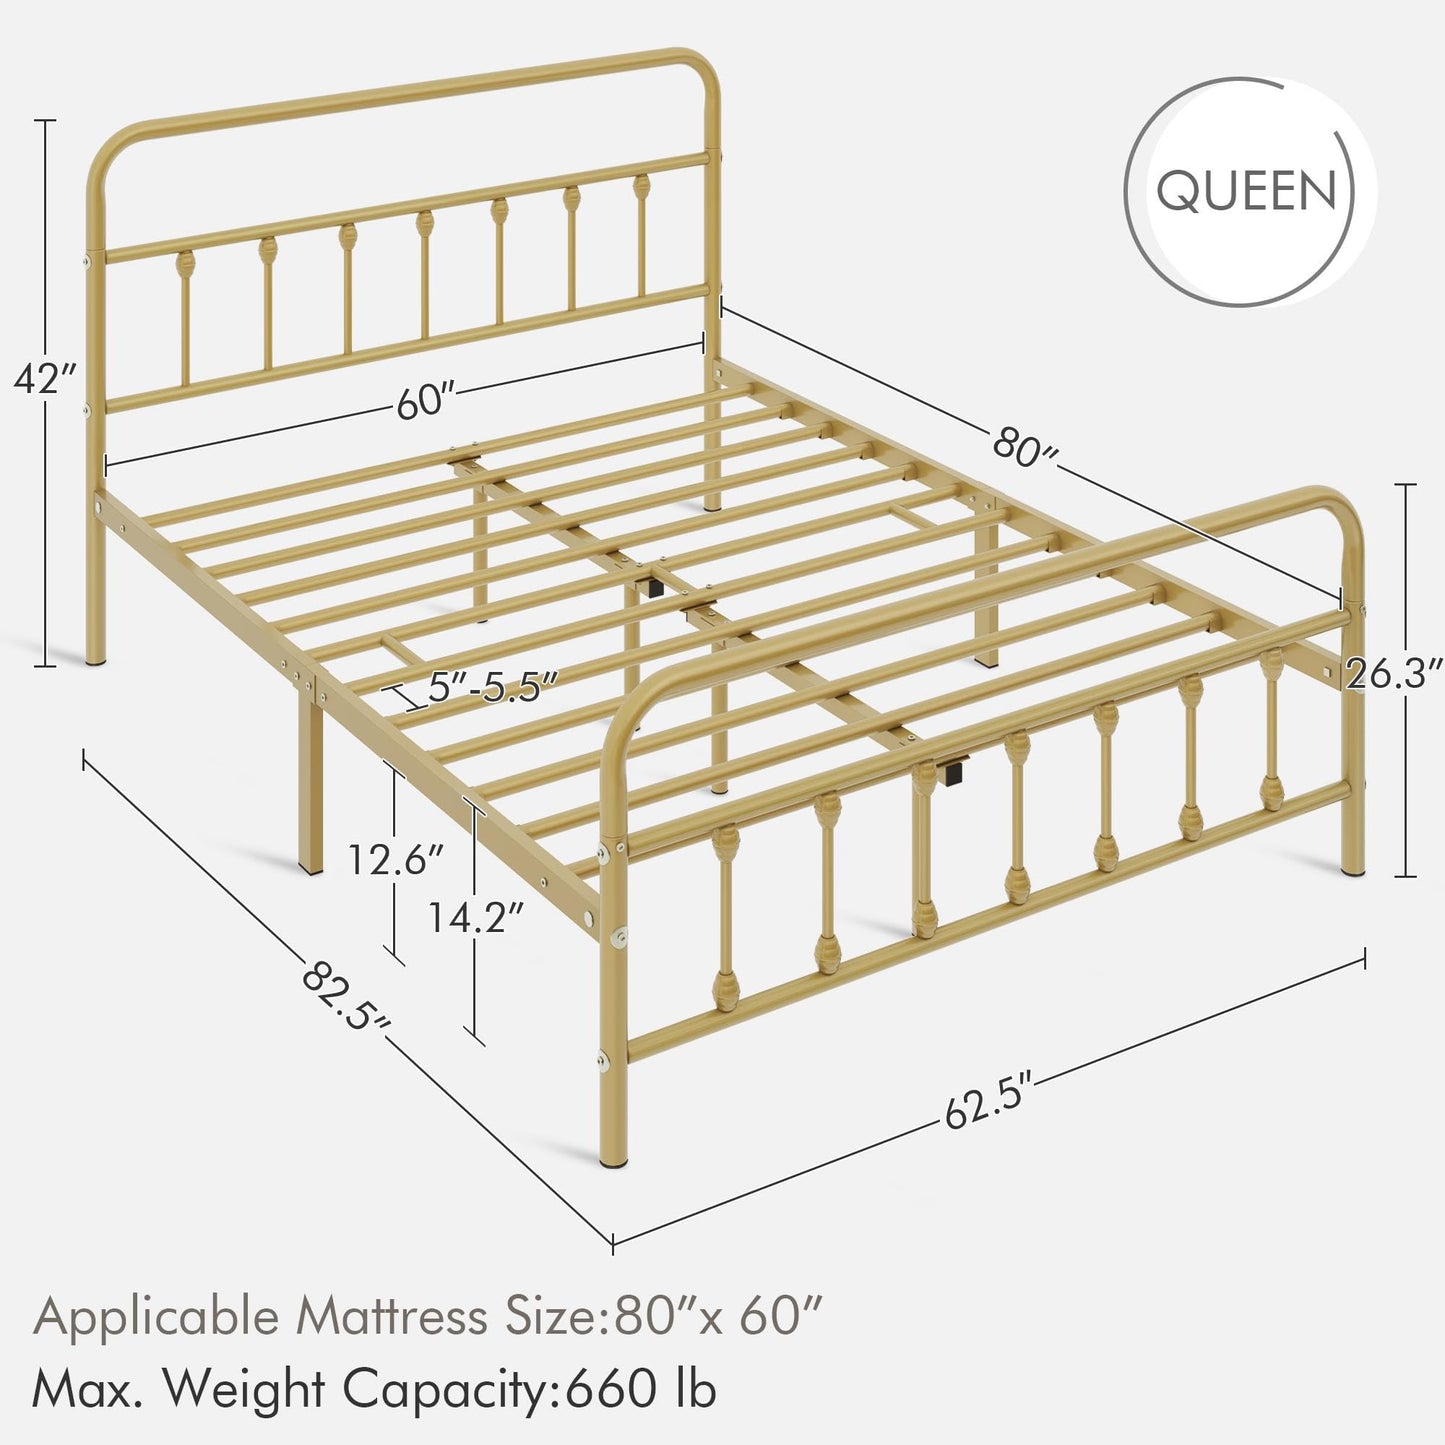 Yaheetech Classic Metal Platform Bed Frame Mattress Foundation with Victorian Style Iron-Art Headboard/Footboard/Under Bed Storage/No Box Spring